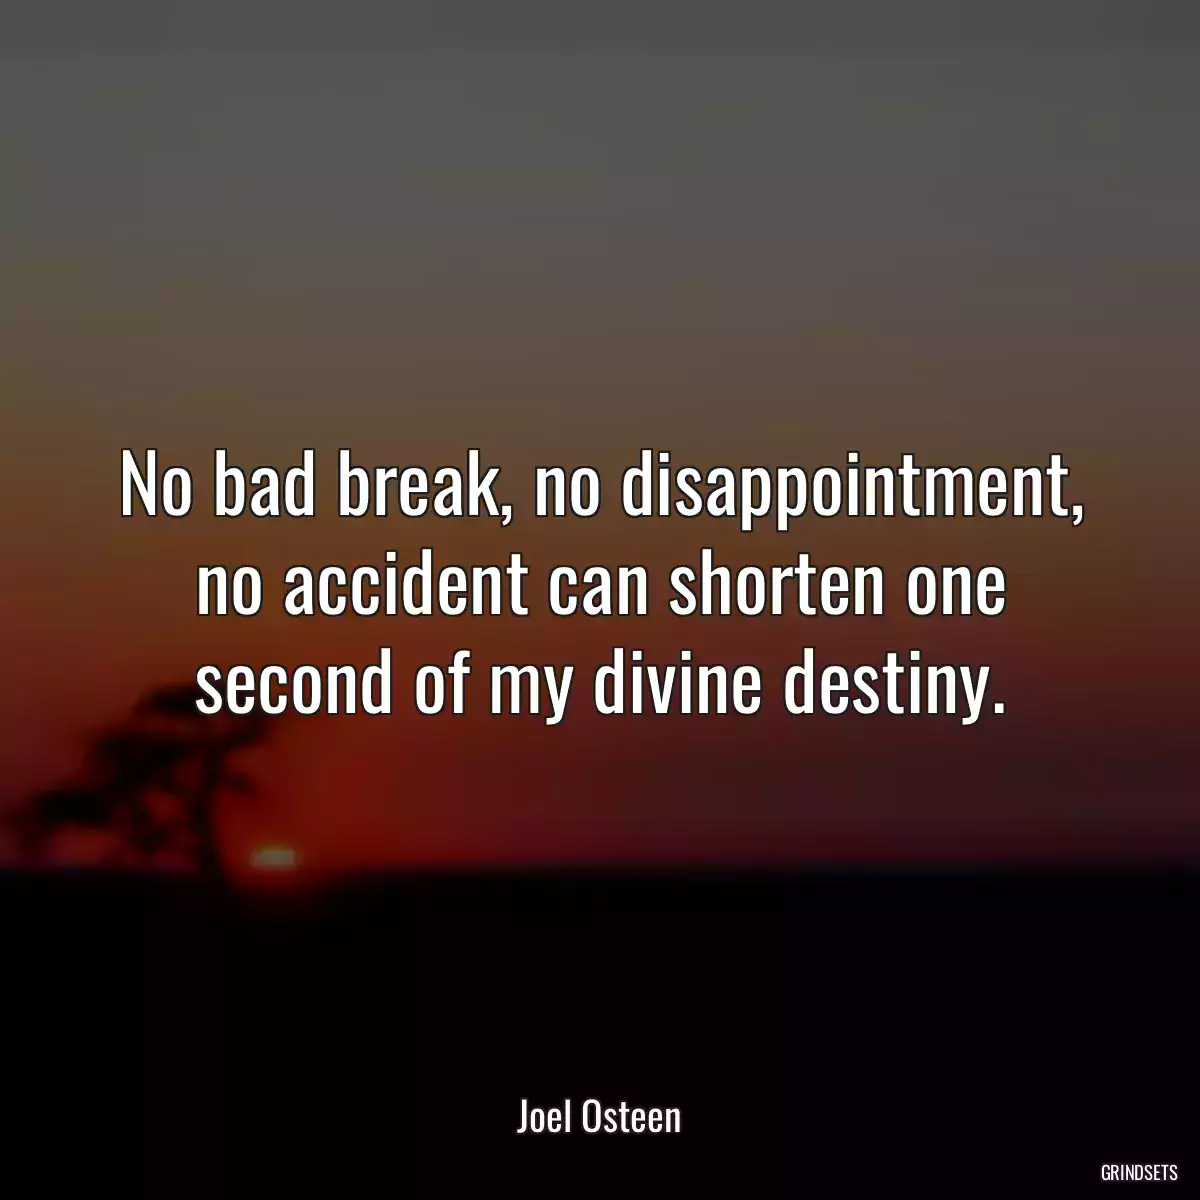 No bad break, no disappointment, no accident can shorten one second of my divine destiny.